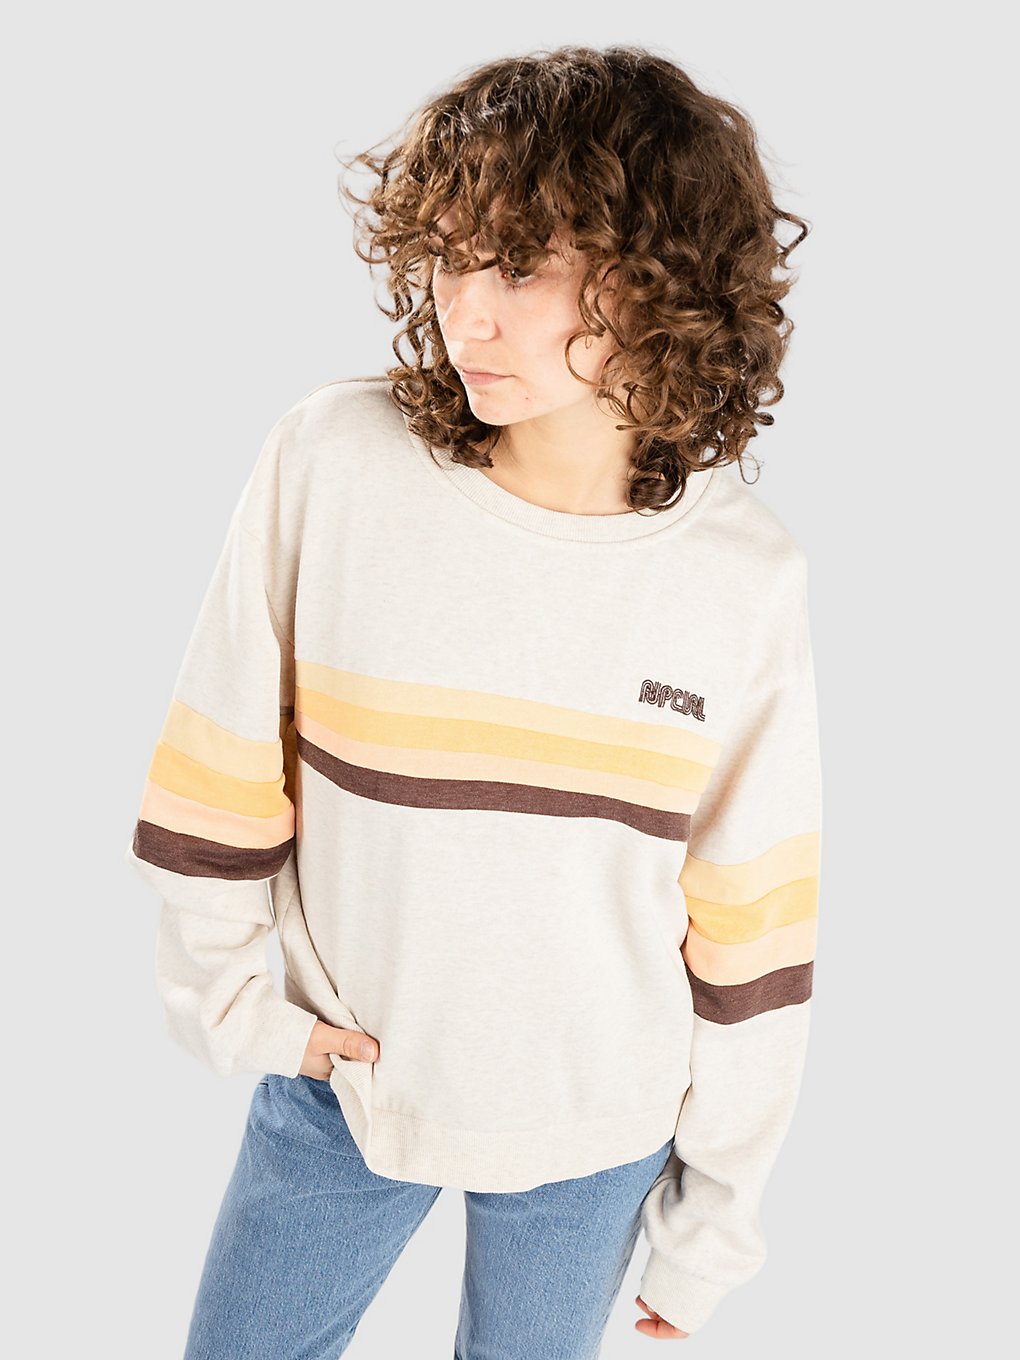 Rip Curl Surf Revival Pannelled Crew Sweater oatmeal marle kaufen